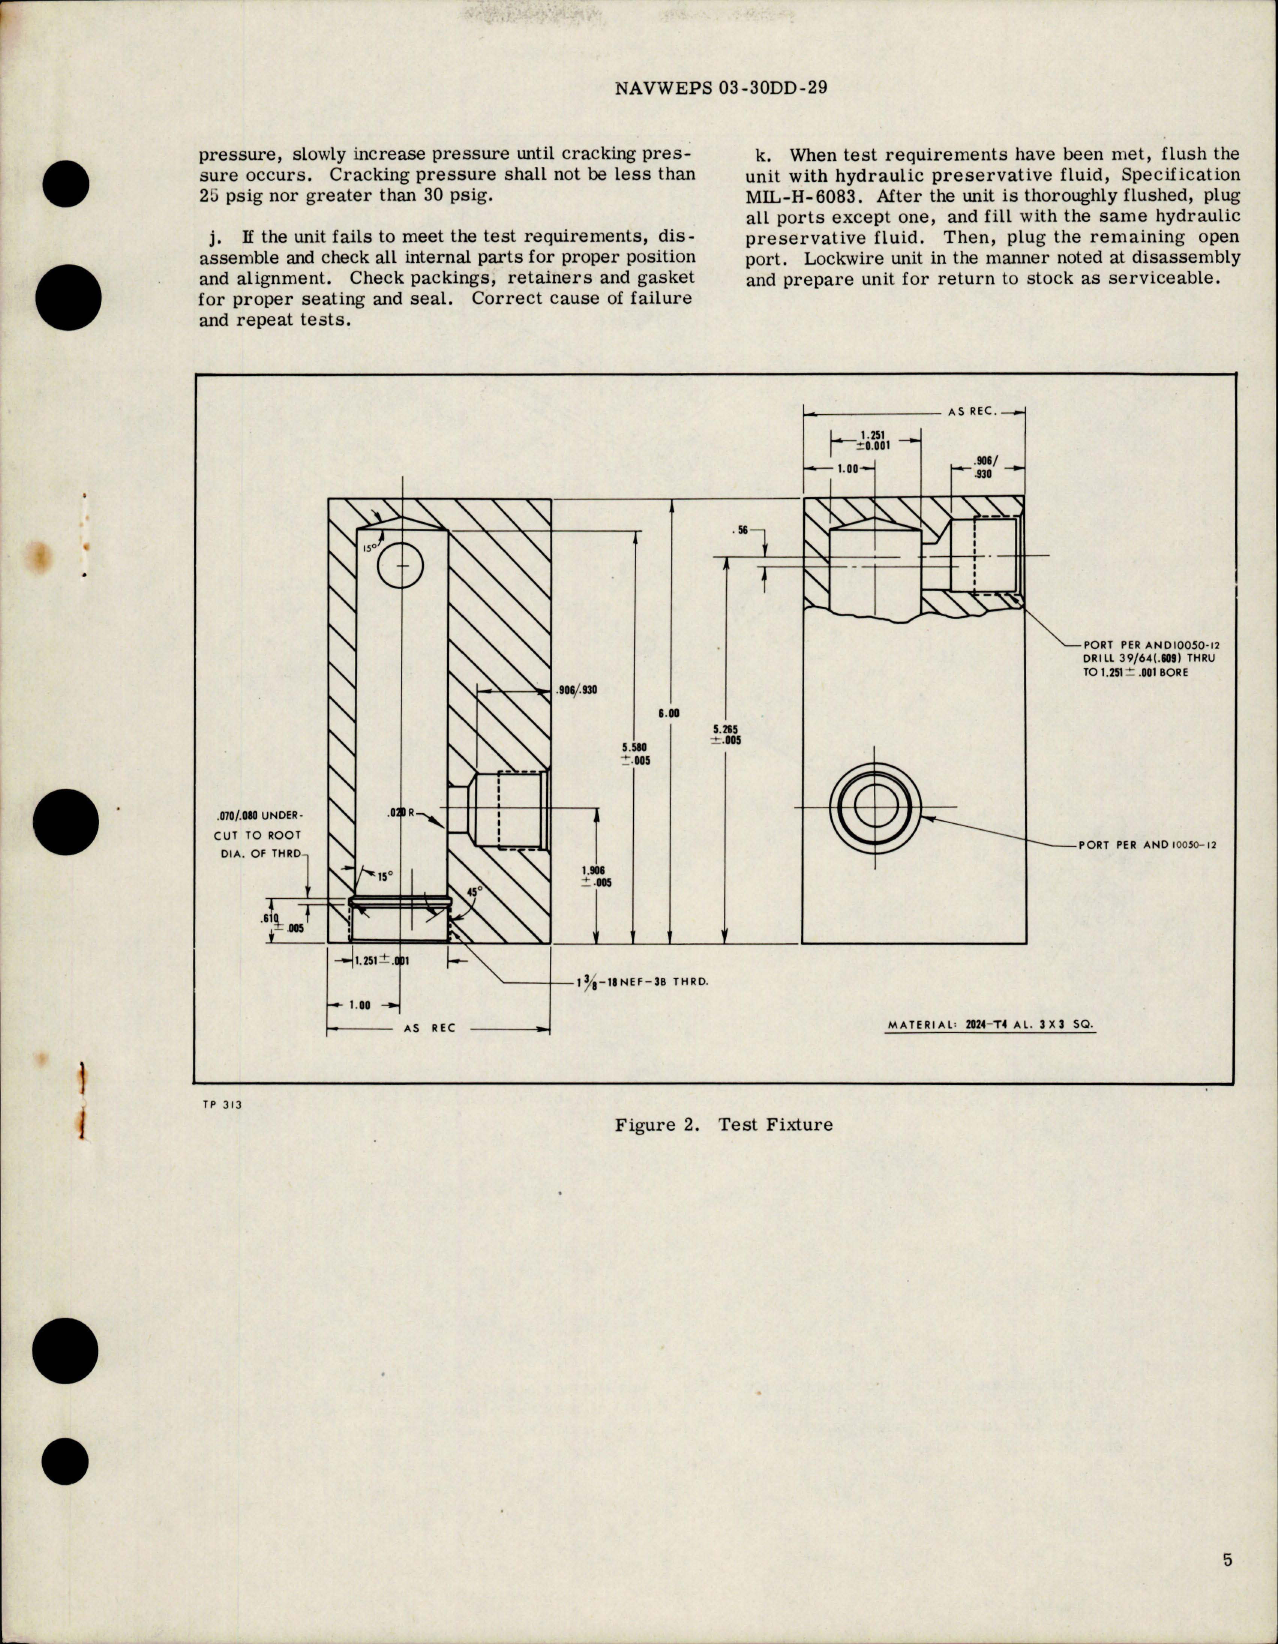 Sample page 5 from AirCorps Library document: Overhaul Instructions with Parts Breakdown for Manifold Power Control System - Part A-61456-1 and A-61456-2